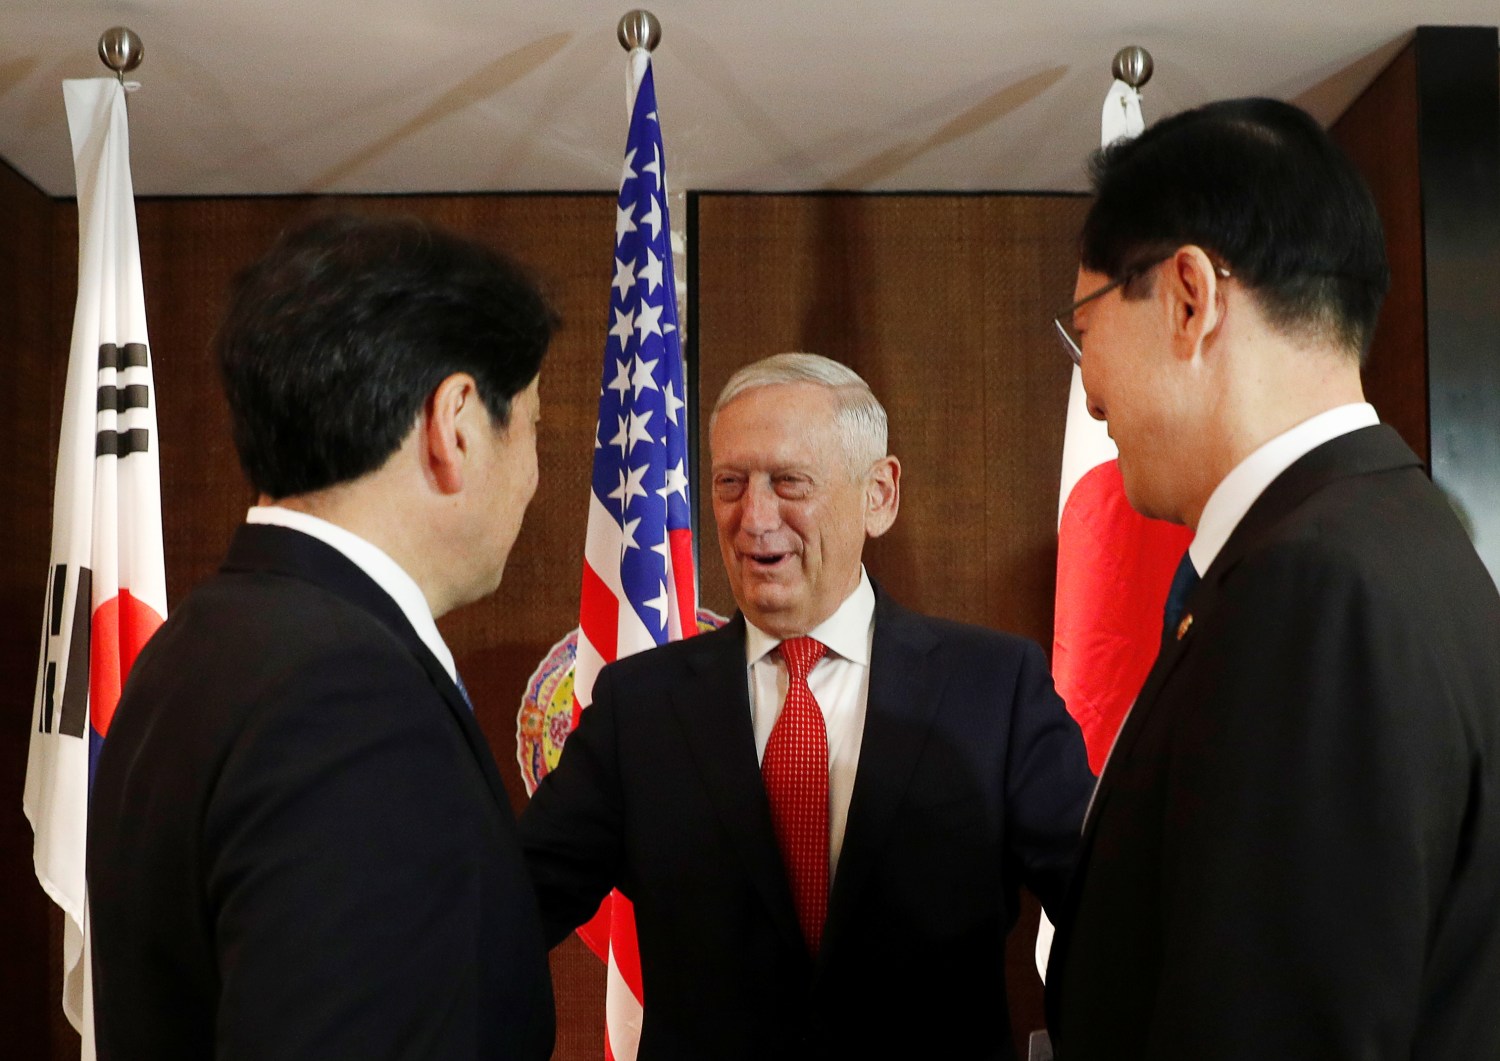 Japan's Defence Minister Itsunori Onodera, U.S. Secretary of Defence Jim Mattis and South Korea's Defence Minister Song Young-moo attend a trilateral meeting on the sidelines of the IISS Shangri-la Dialogue in Singapore June 3, 2018. REUTERS/Edgar Su - RC18246DC620